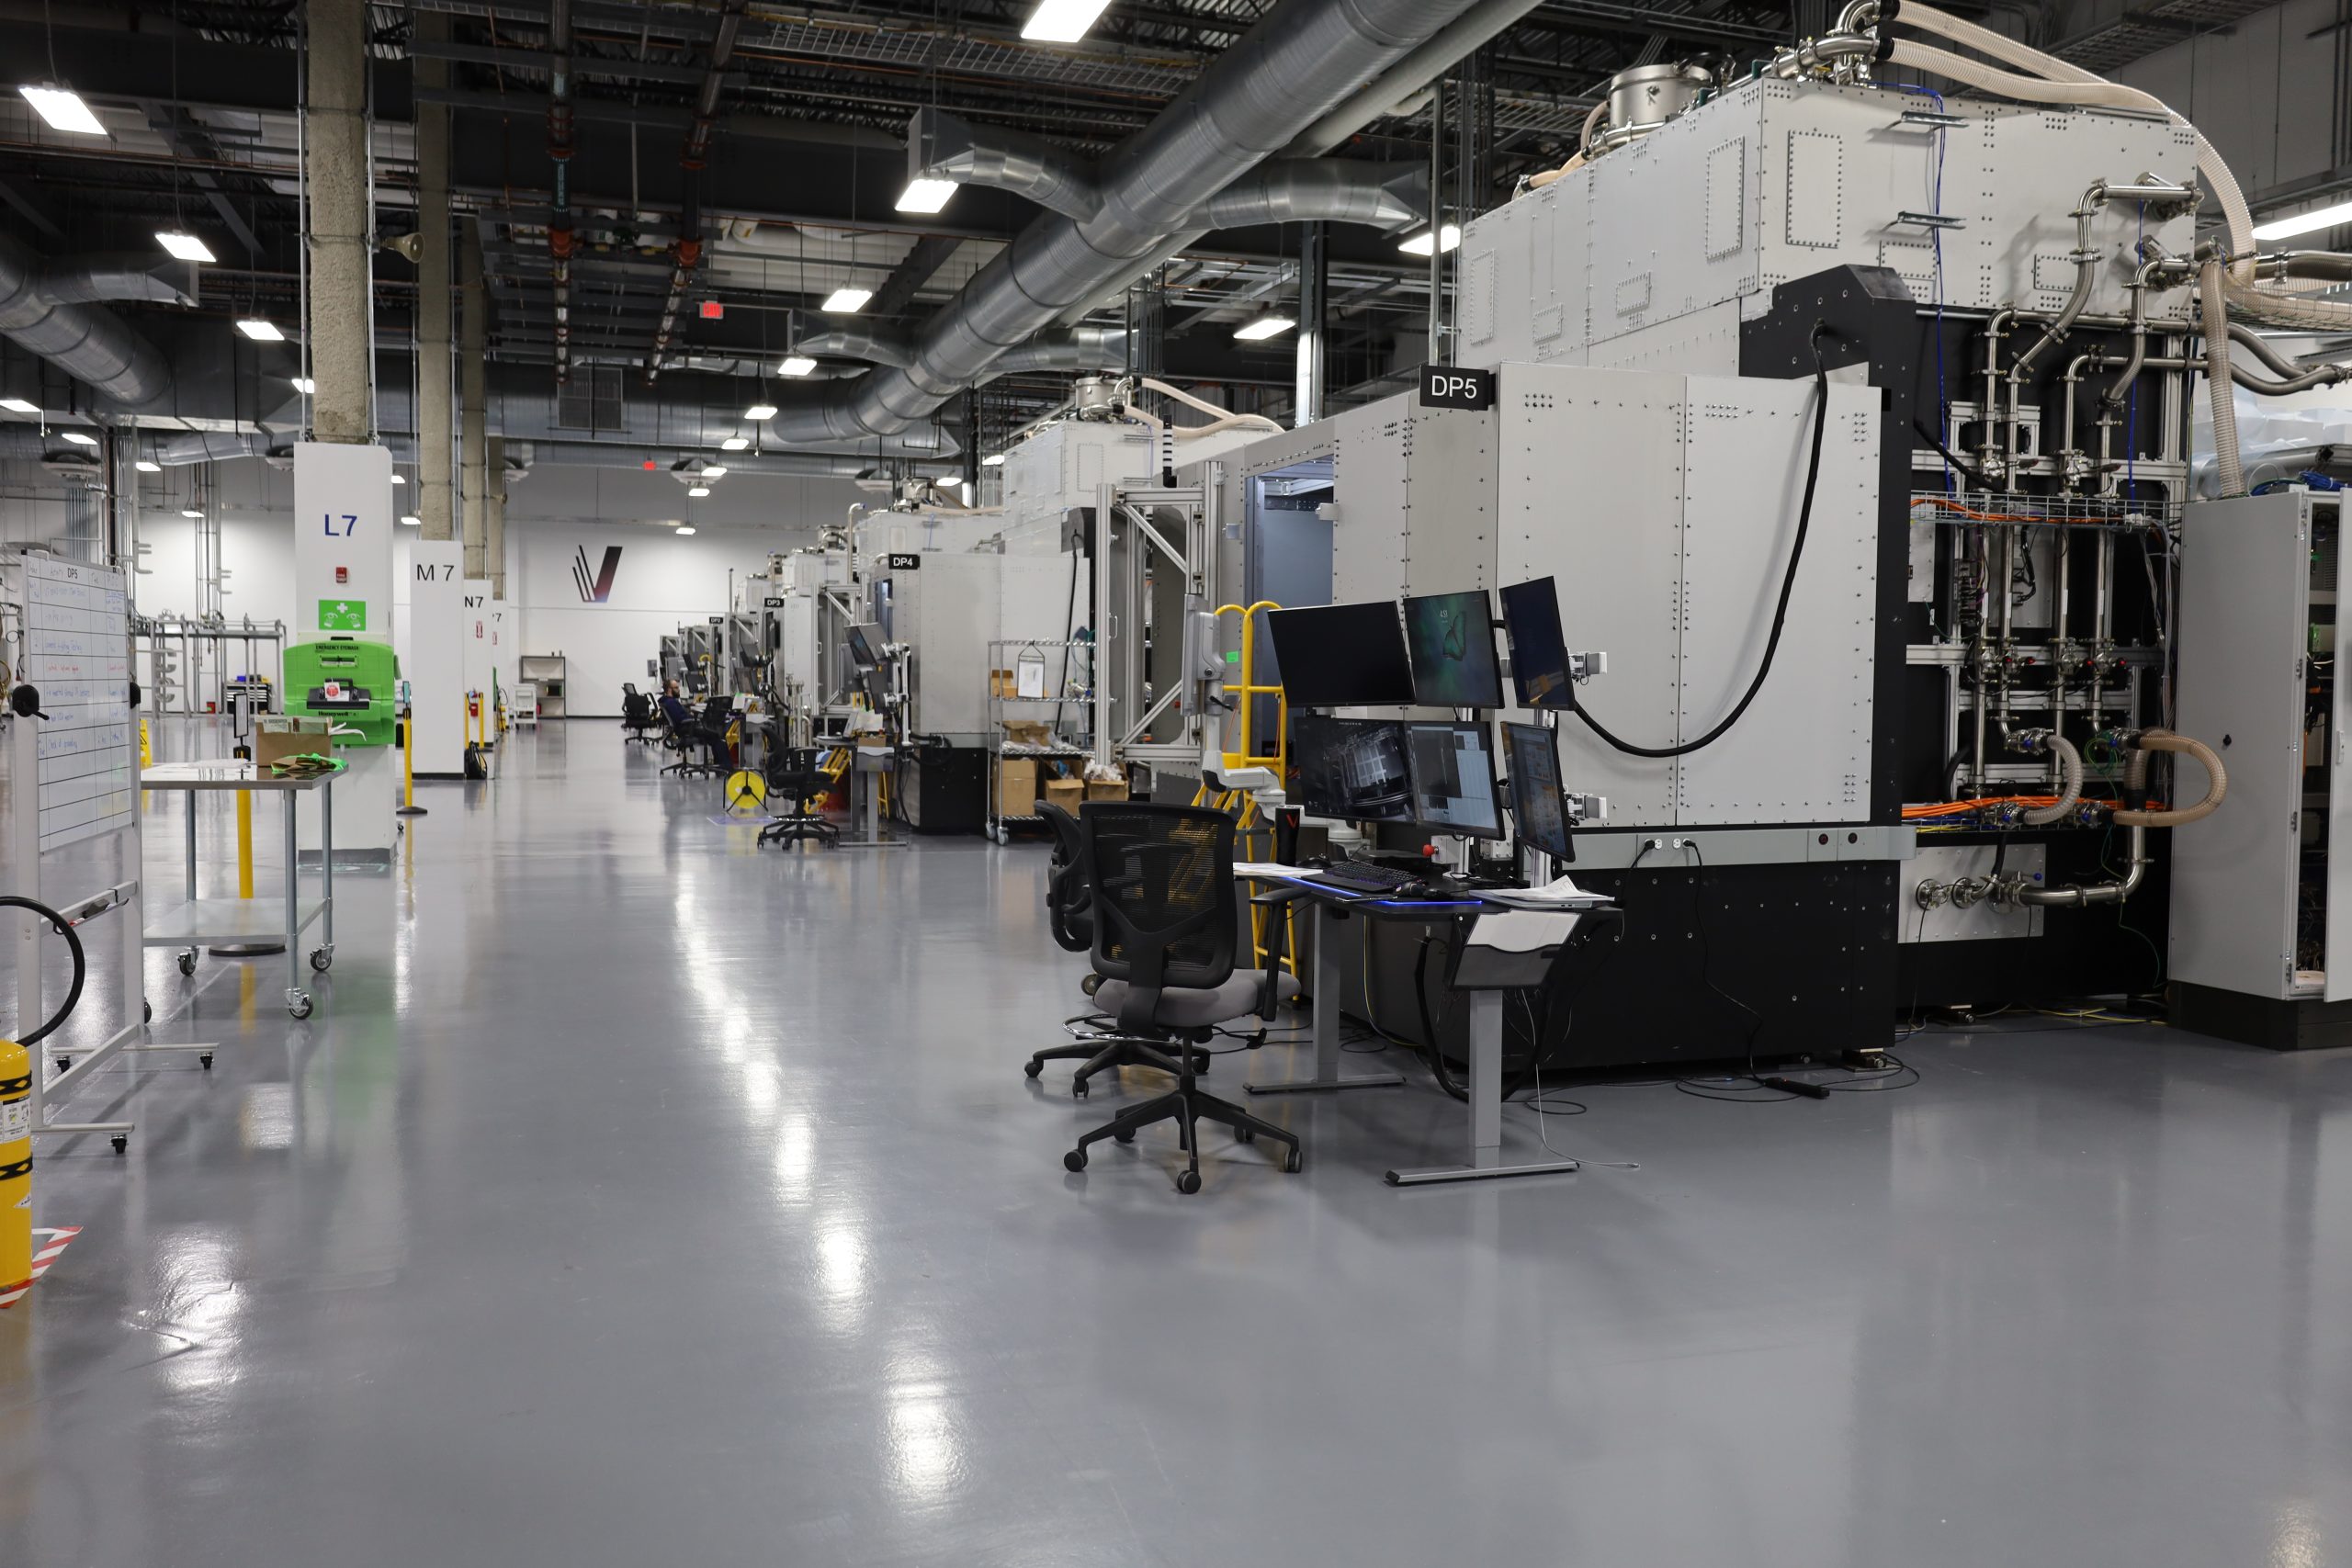 VulcanForms' new facility houses a fleet of 100kW laser 3d printing systems. Image via VulcanForms.